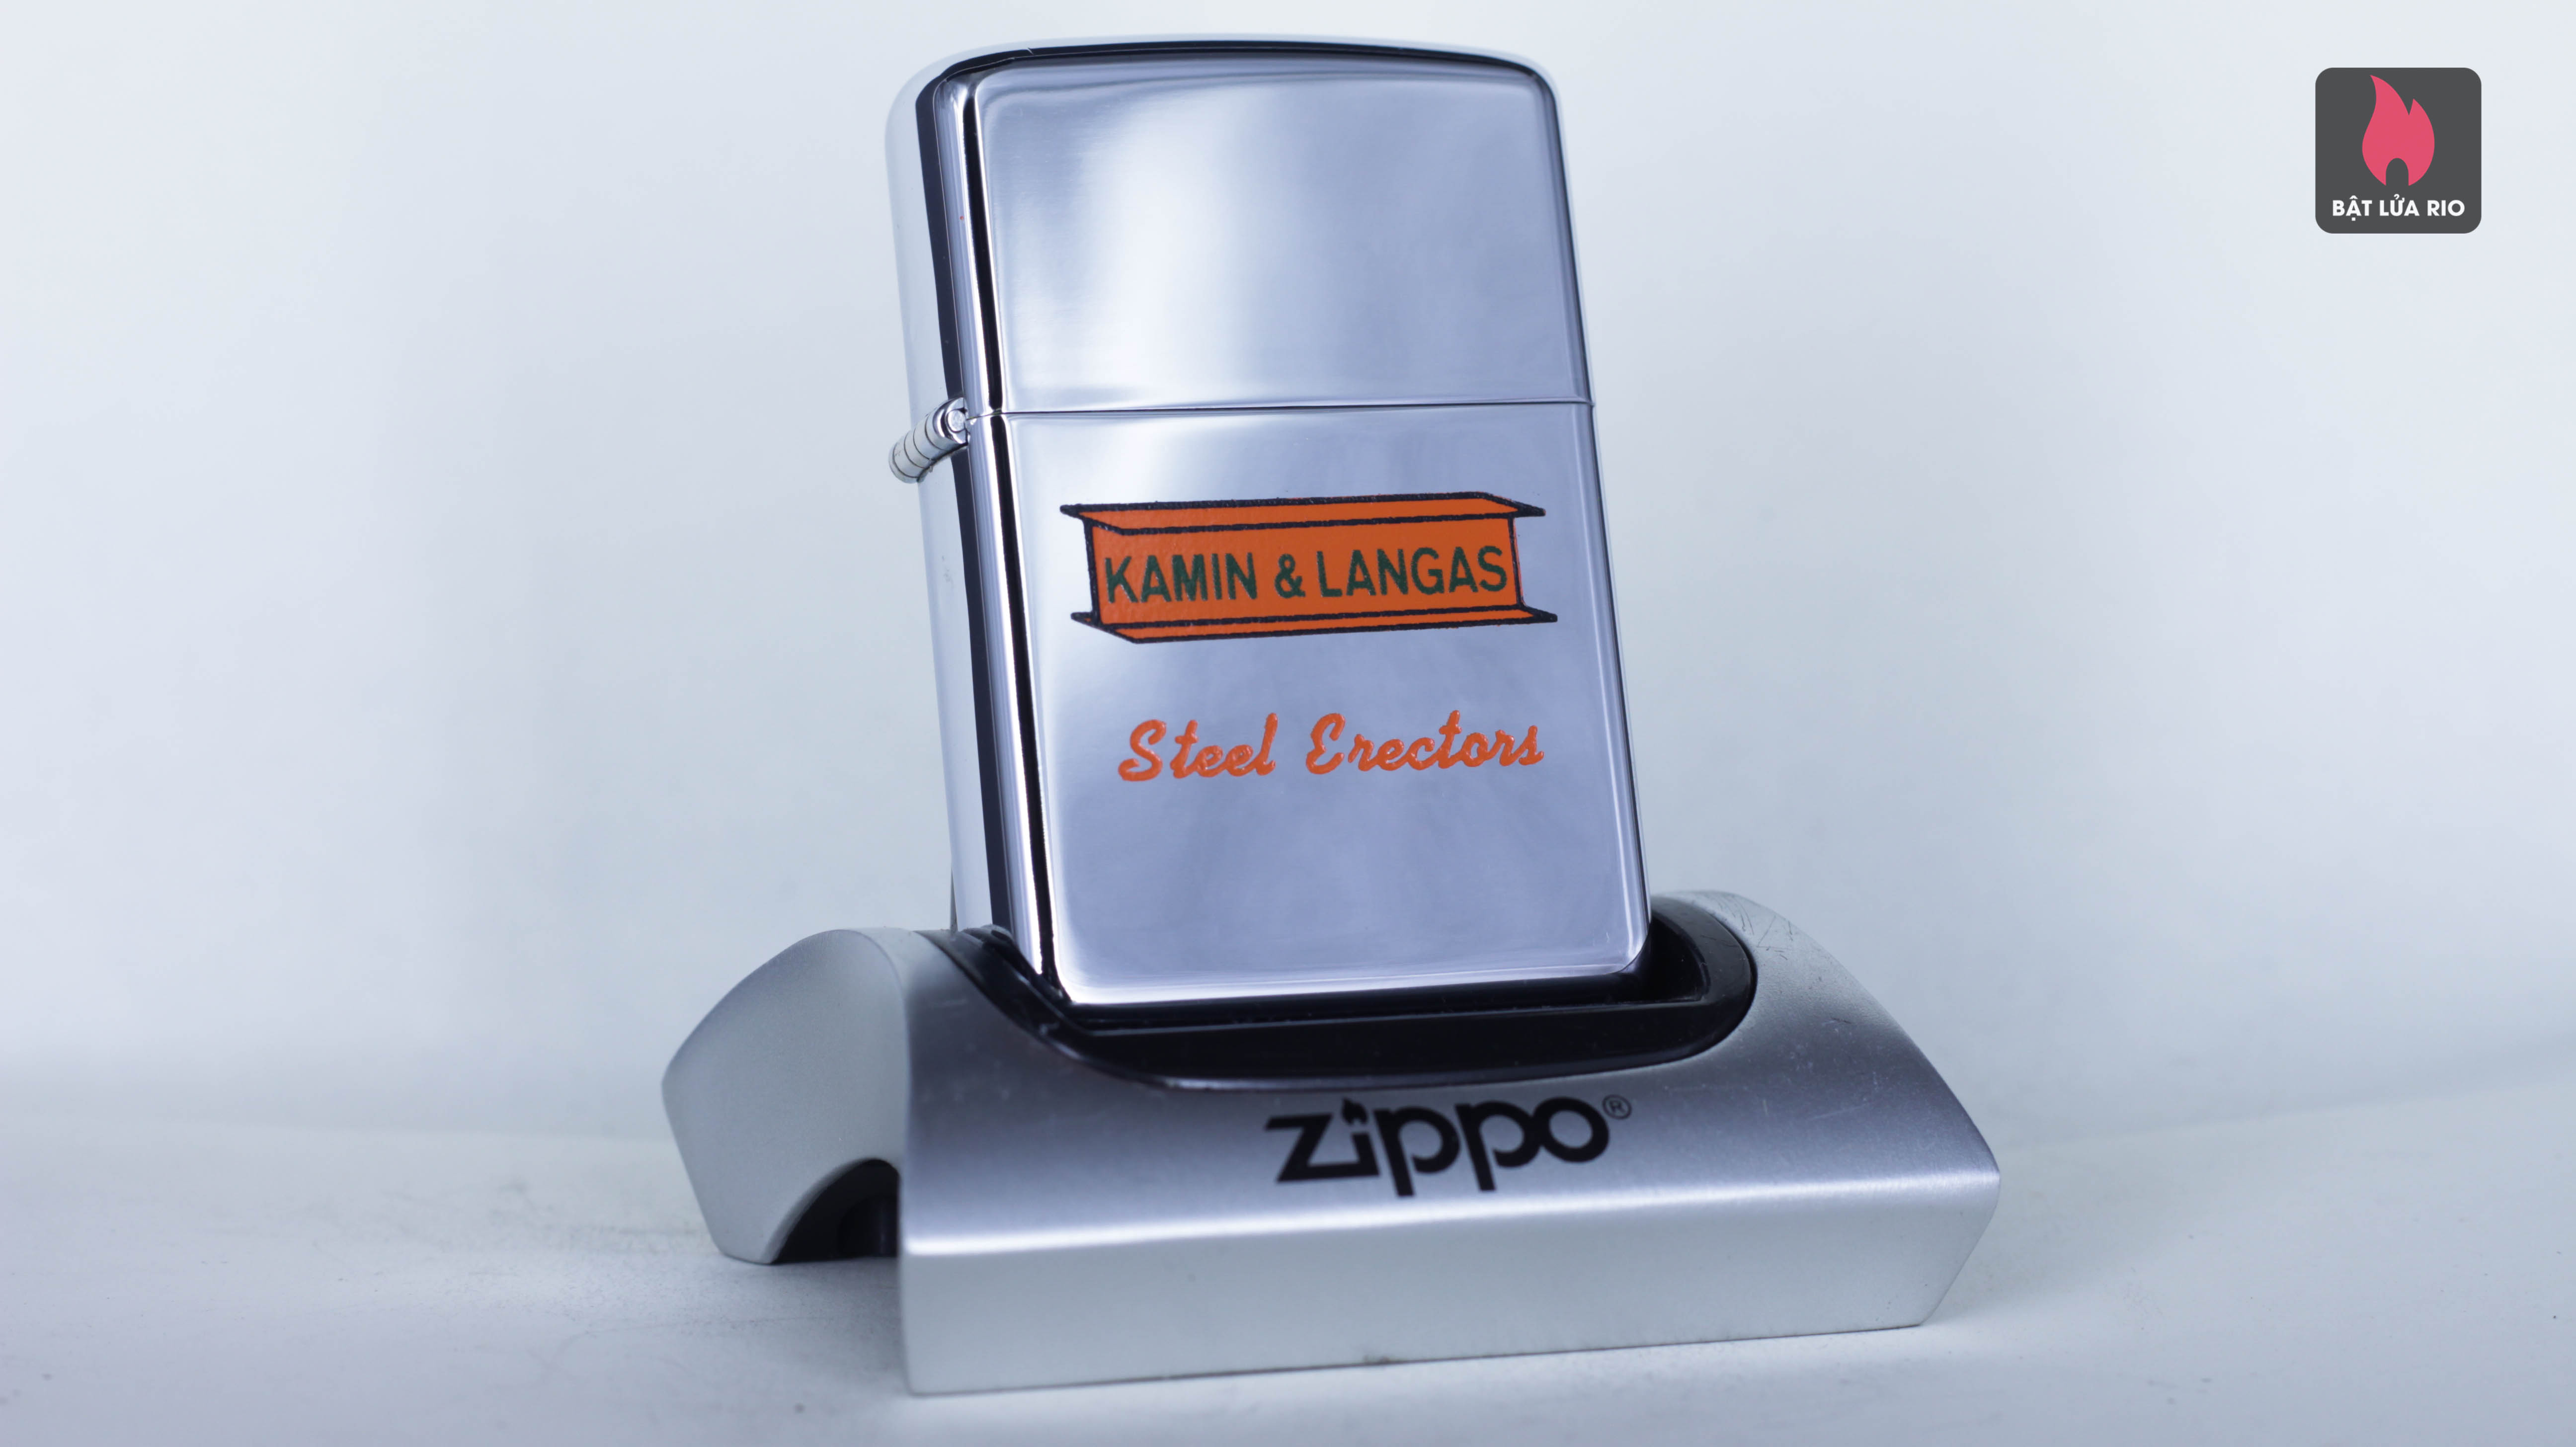 ZIPPO XƯA 1968 - KAMIN & LANGAS STEEL - TOWN & COUNTRY